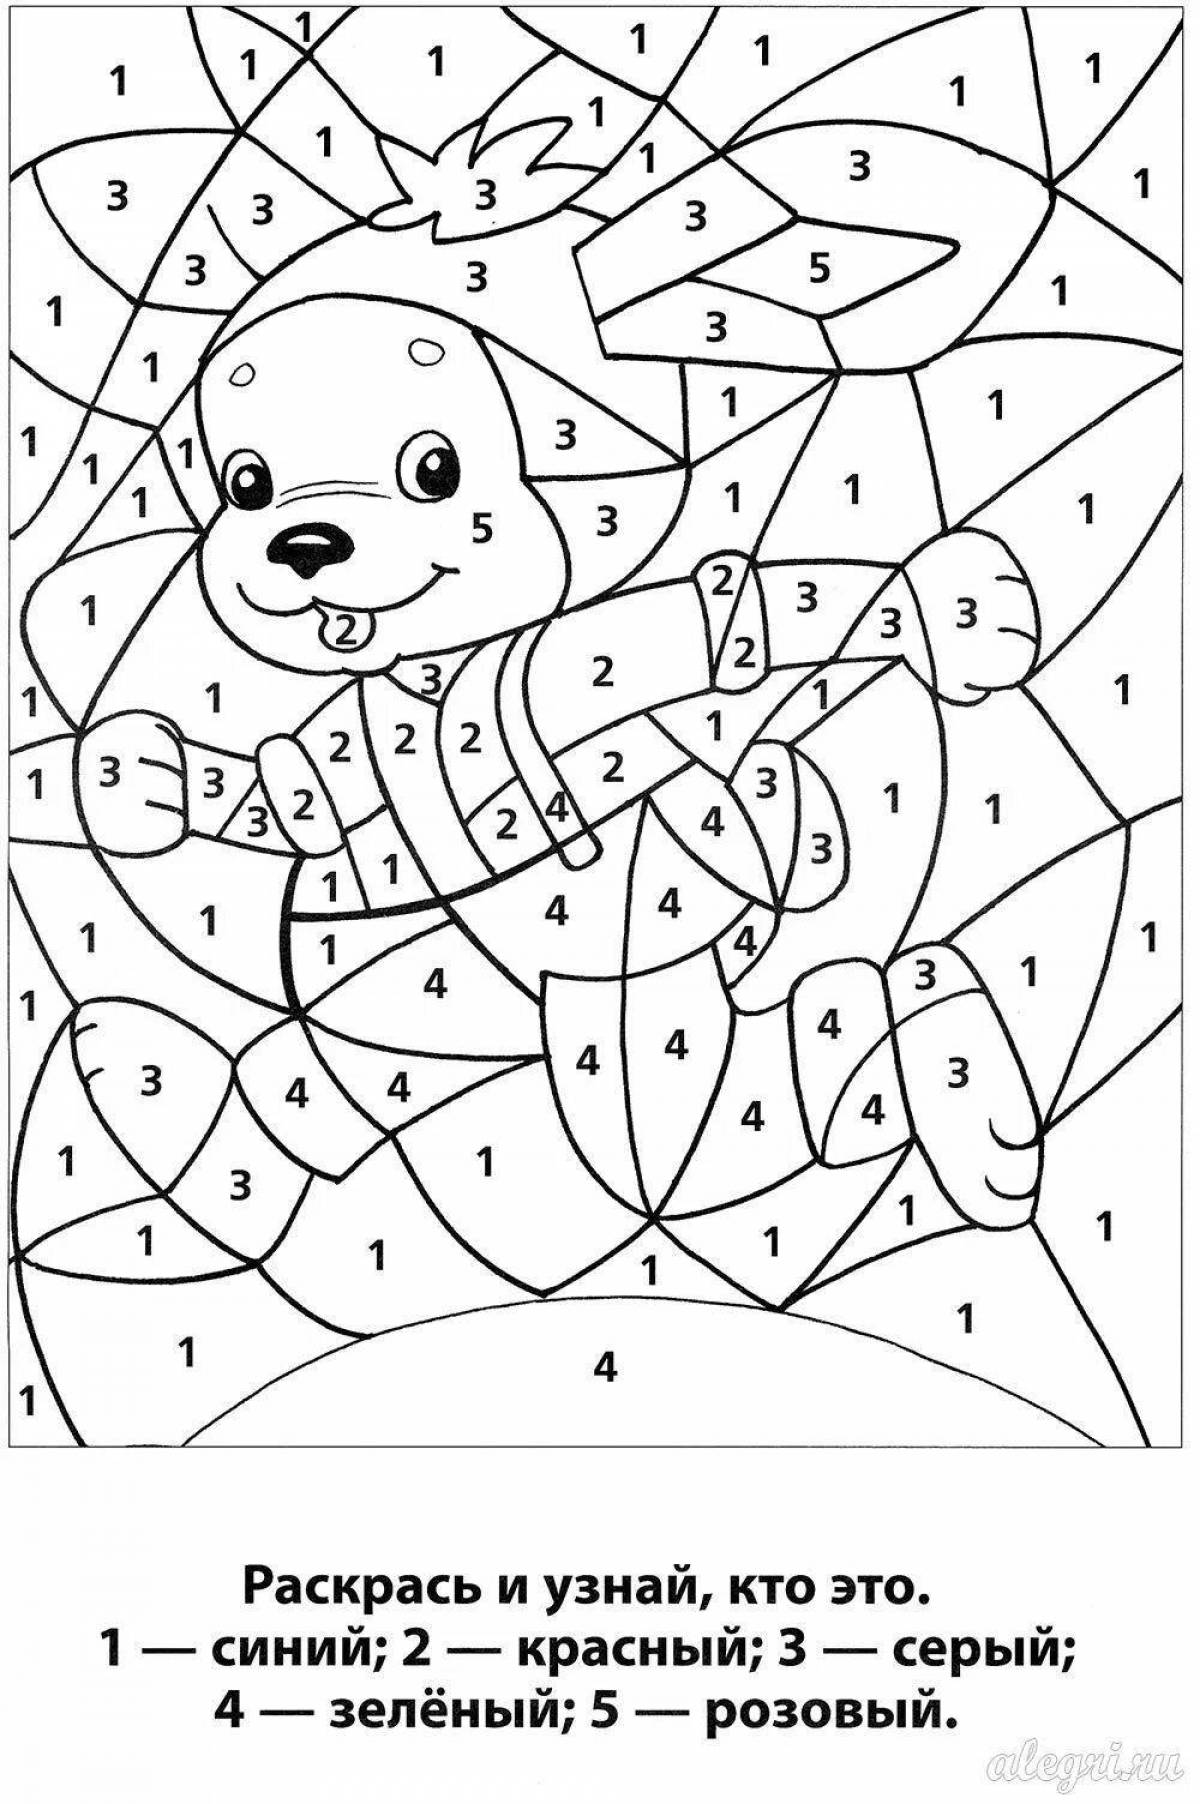 Unique coloring by numbers for kids 5-7 years old